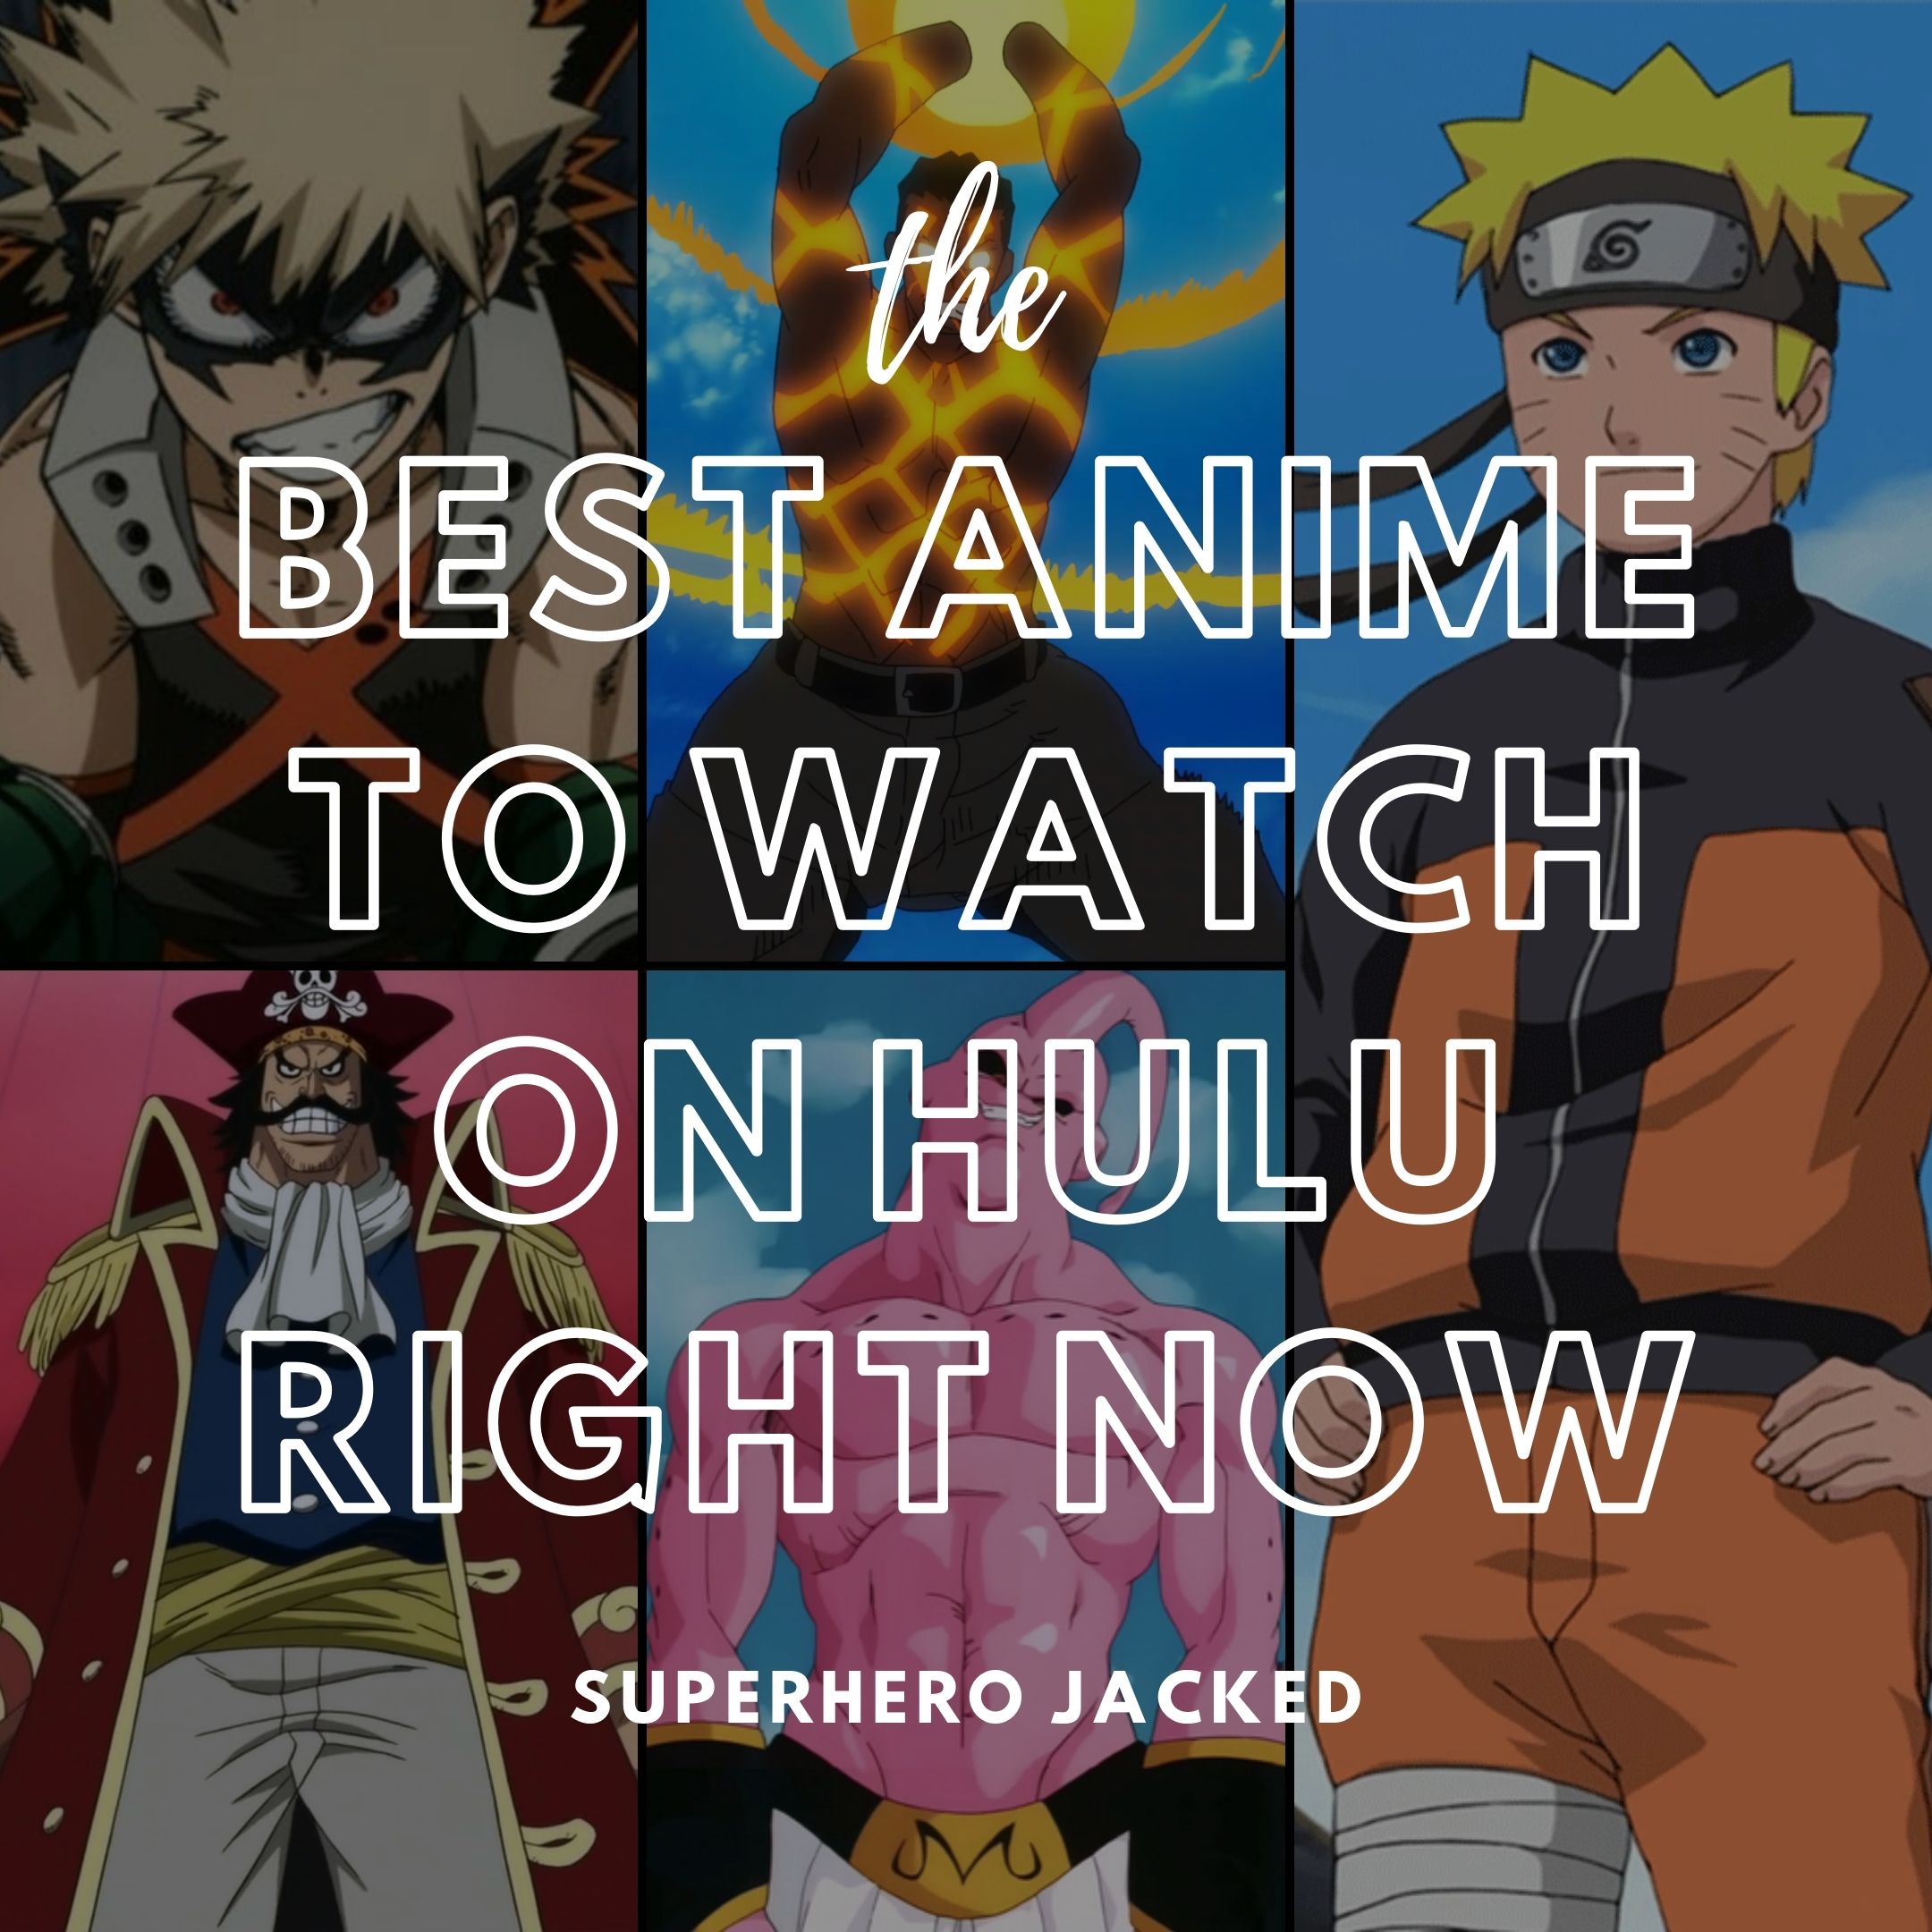 Best Anime to Watch on Hulu Right Now  Superhero Jacked